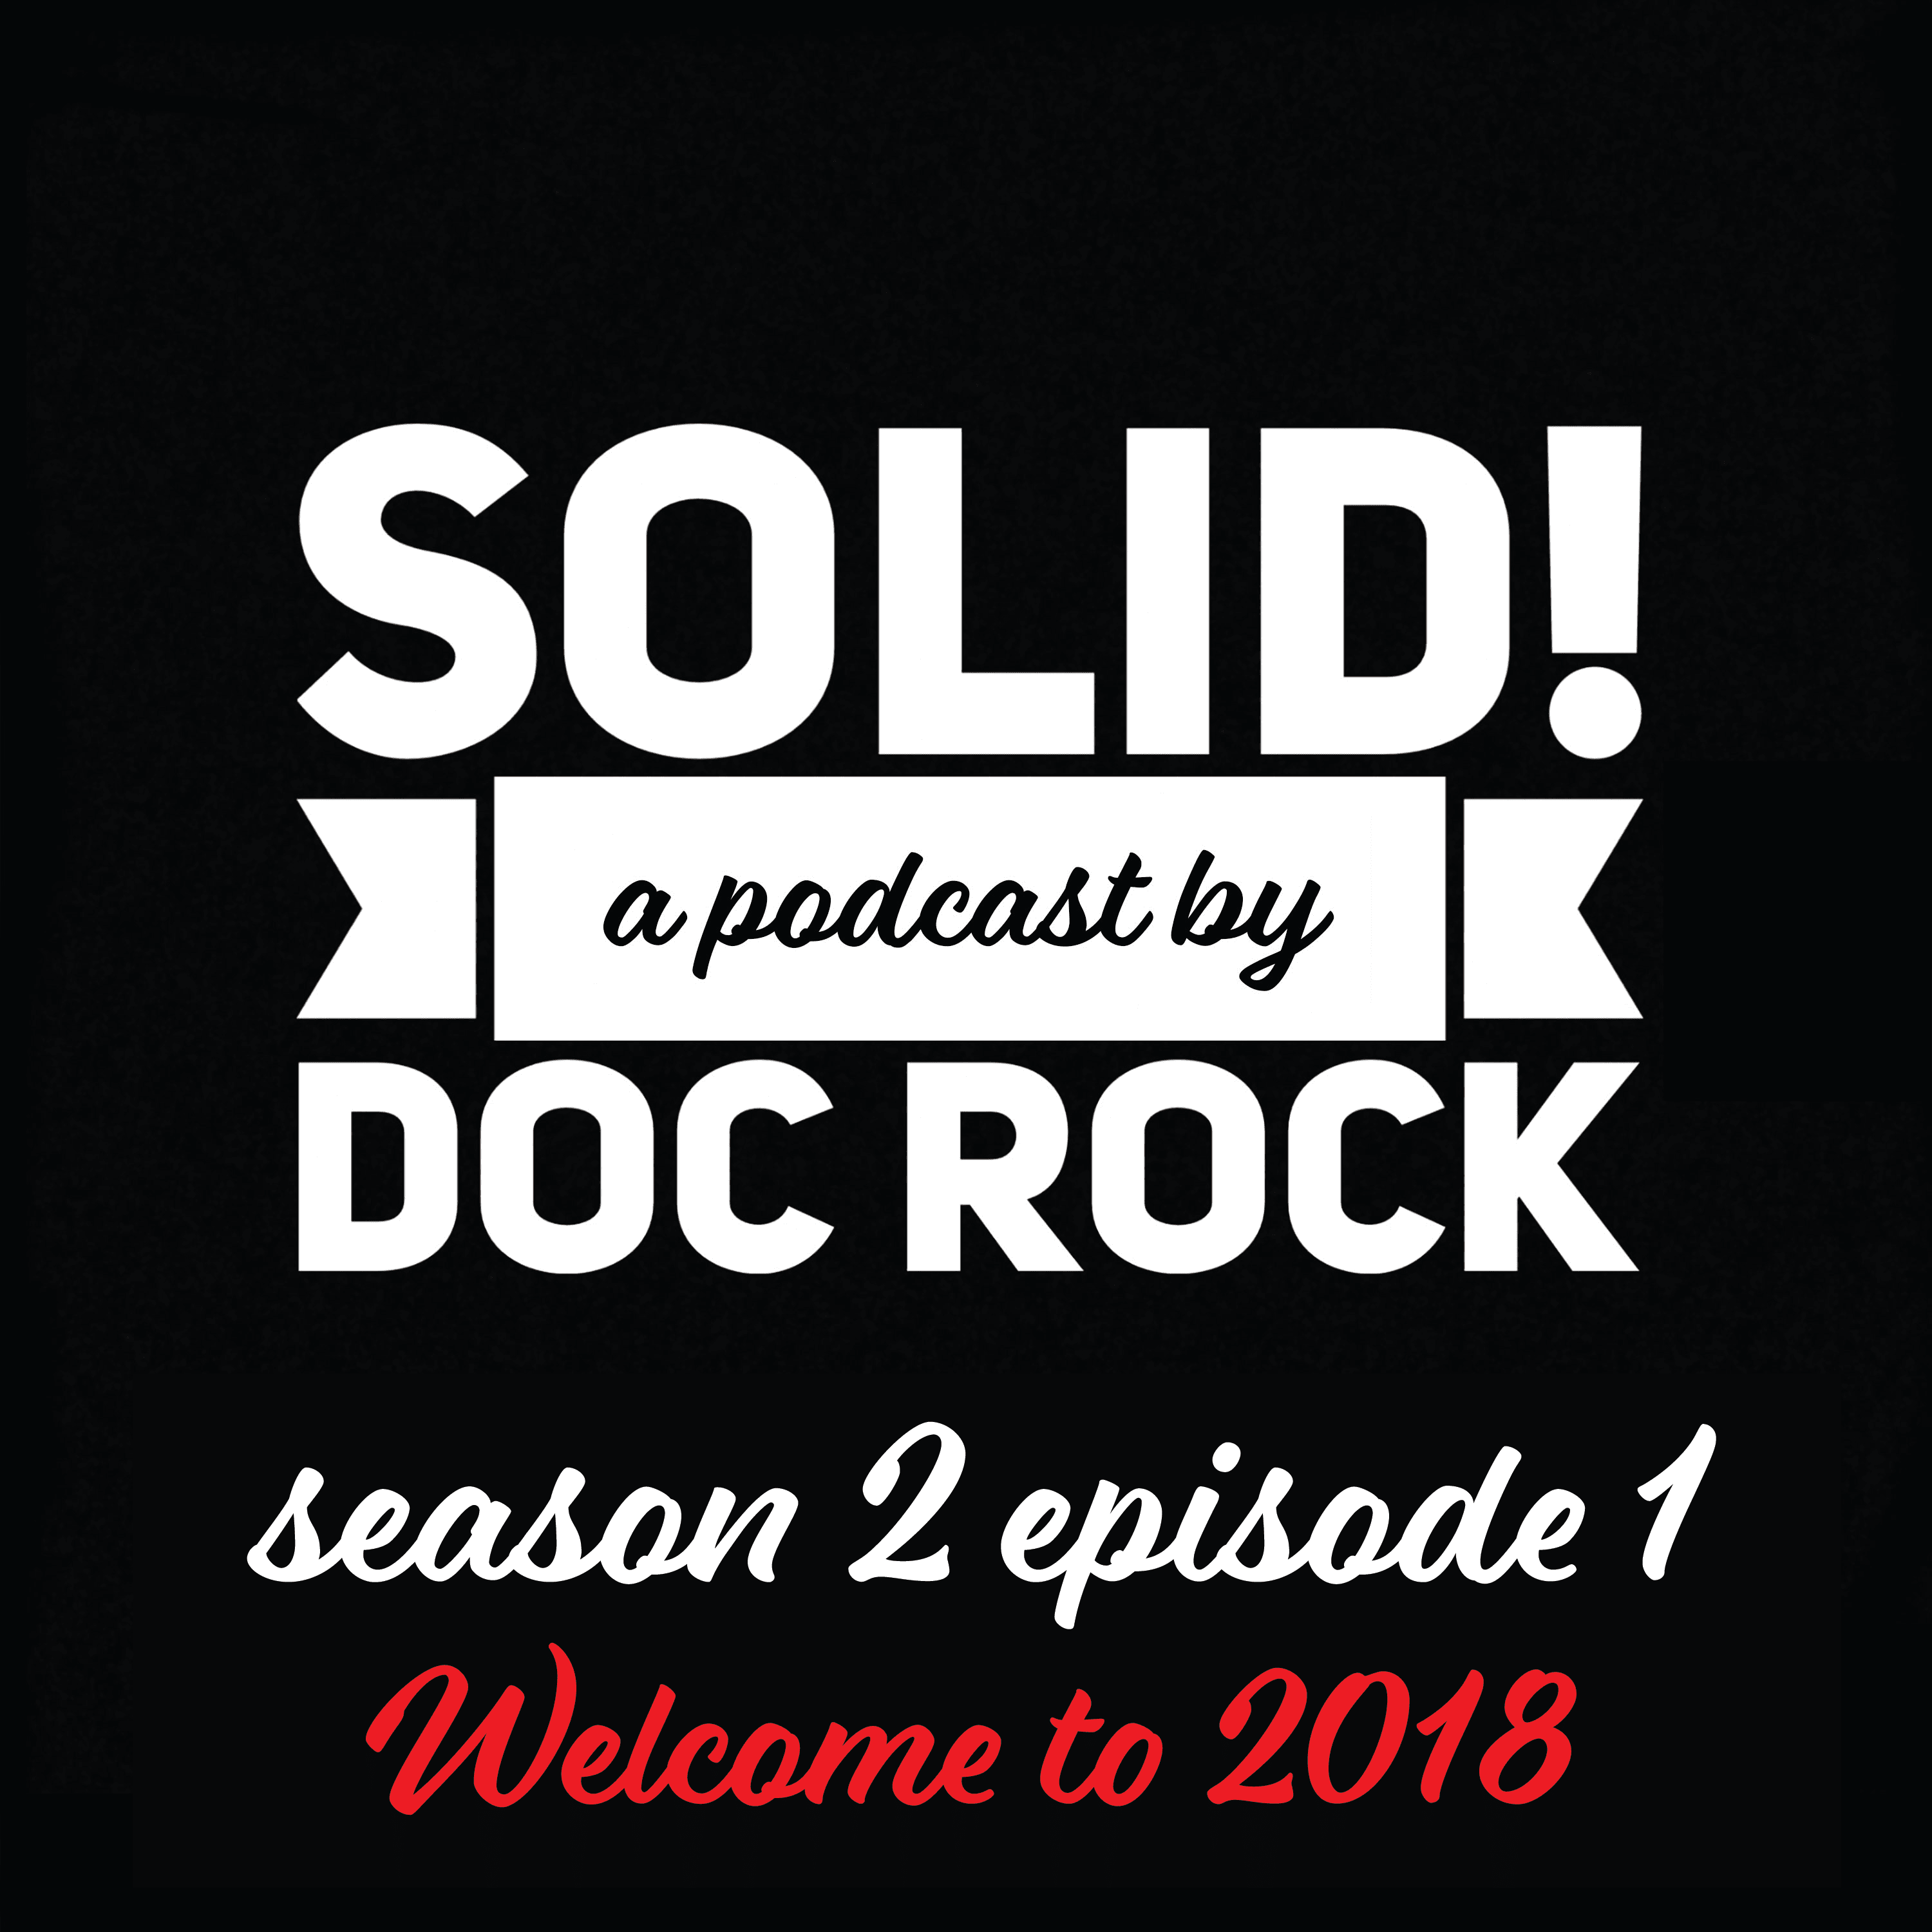 The Solid Podcast: Season 2 Episode 1 - Welcome to 2018